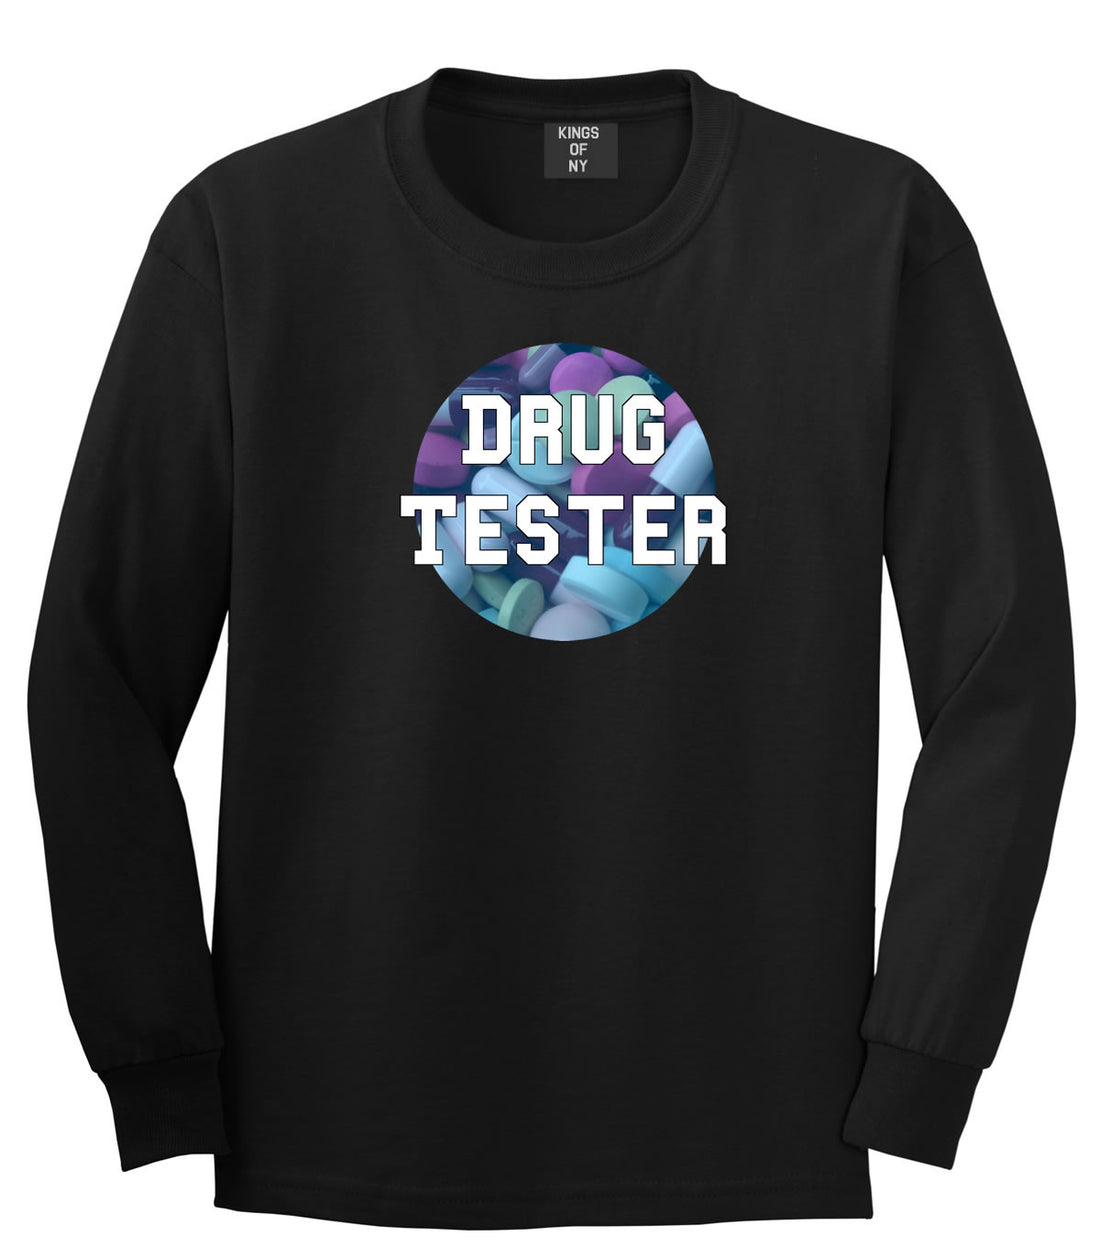 Drug tester weed smoking funny college Long Sleeve T-Shirt In Black by Kings Of NY